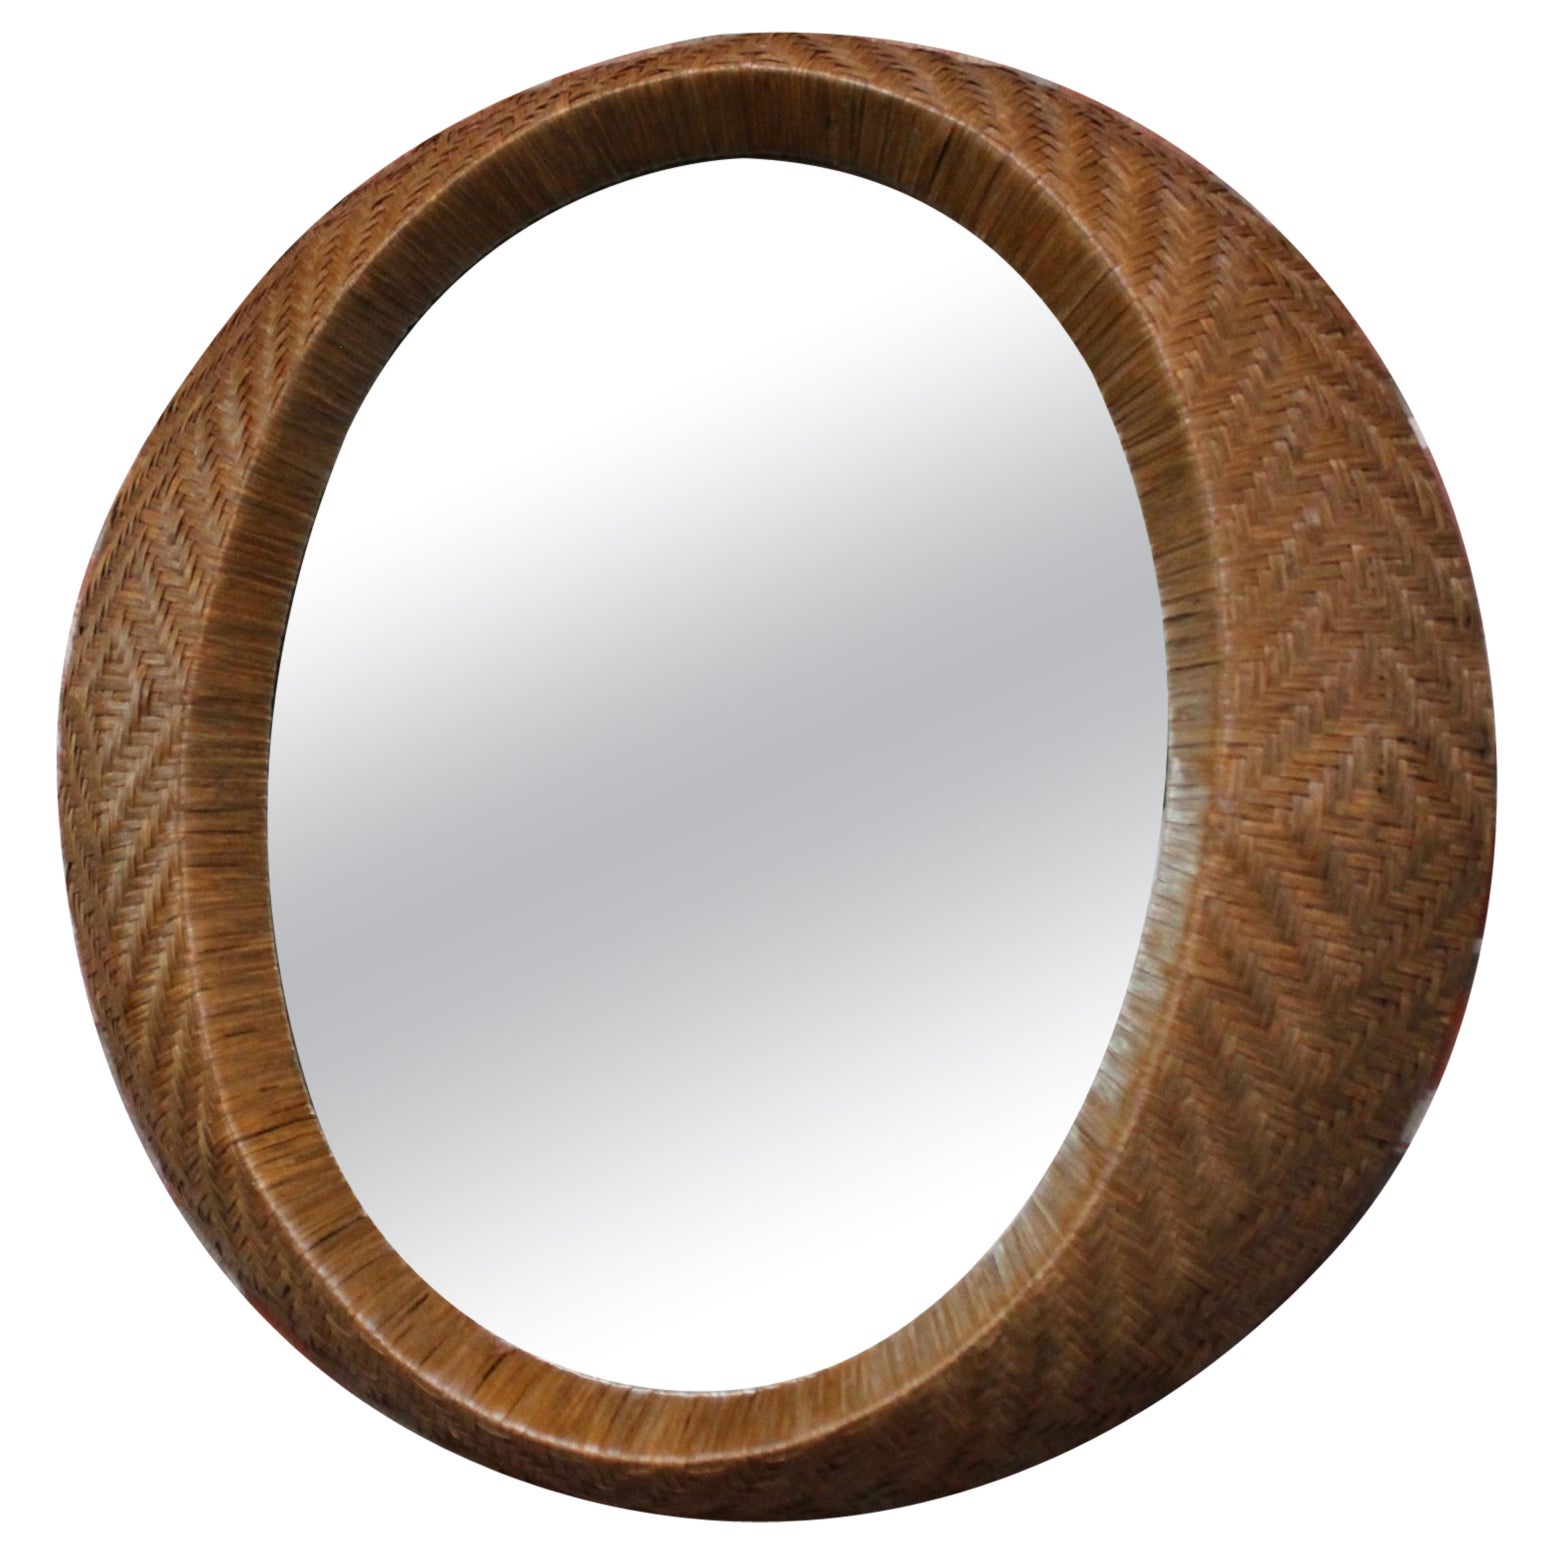 Woven Rattan Wall Mirror by Umbra For Sale